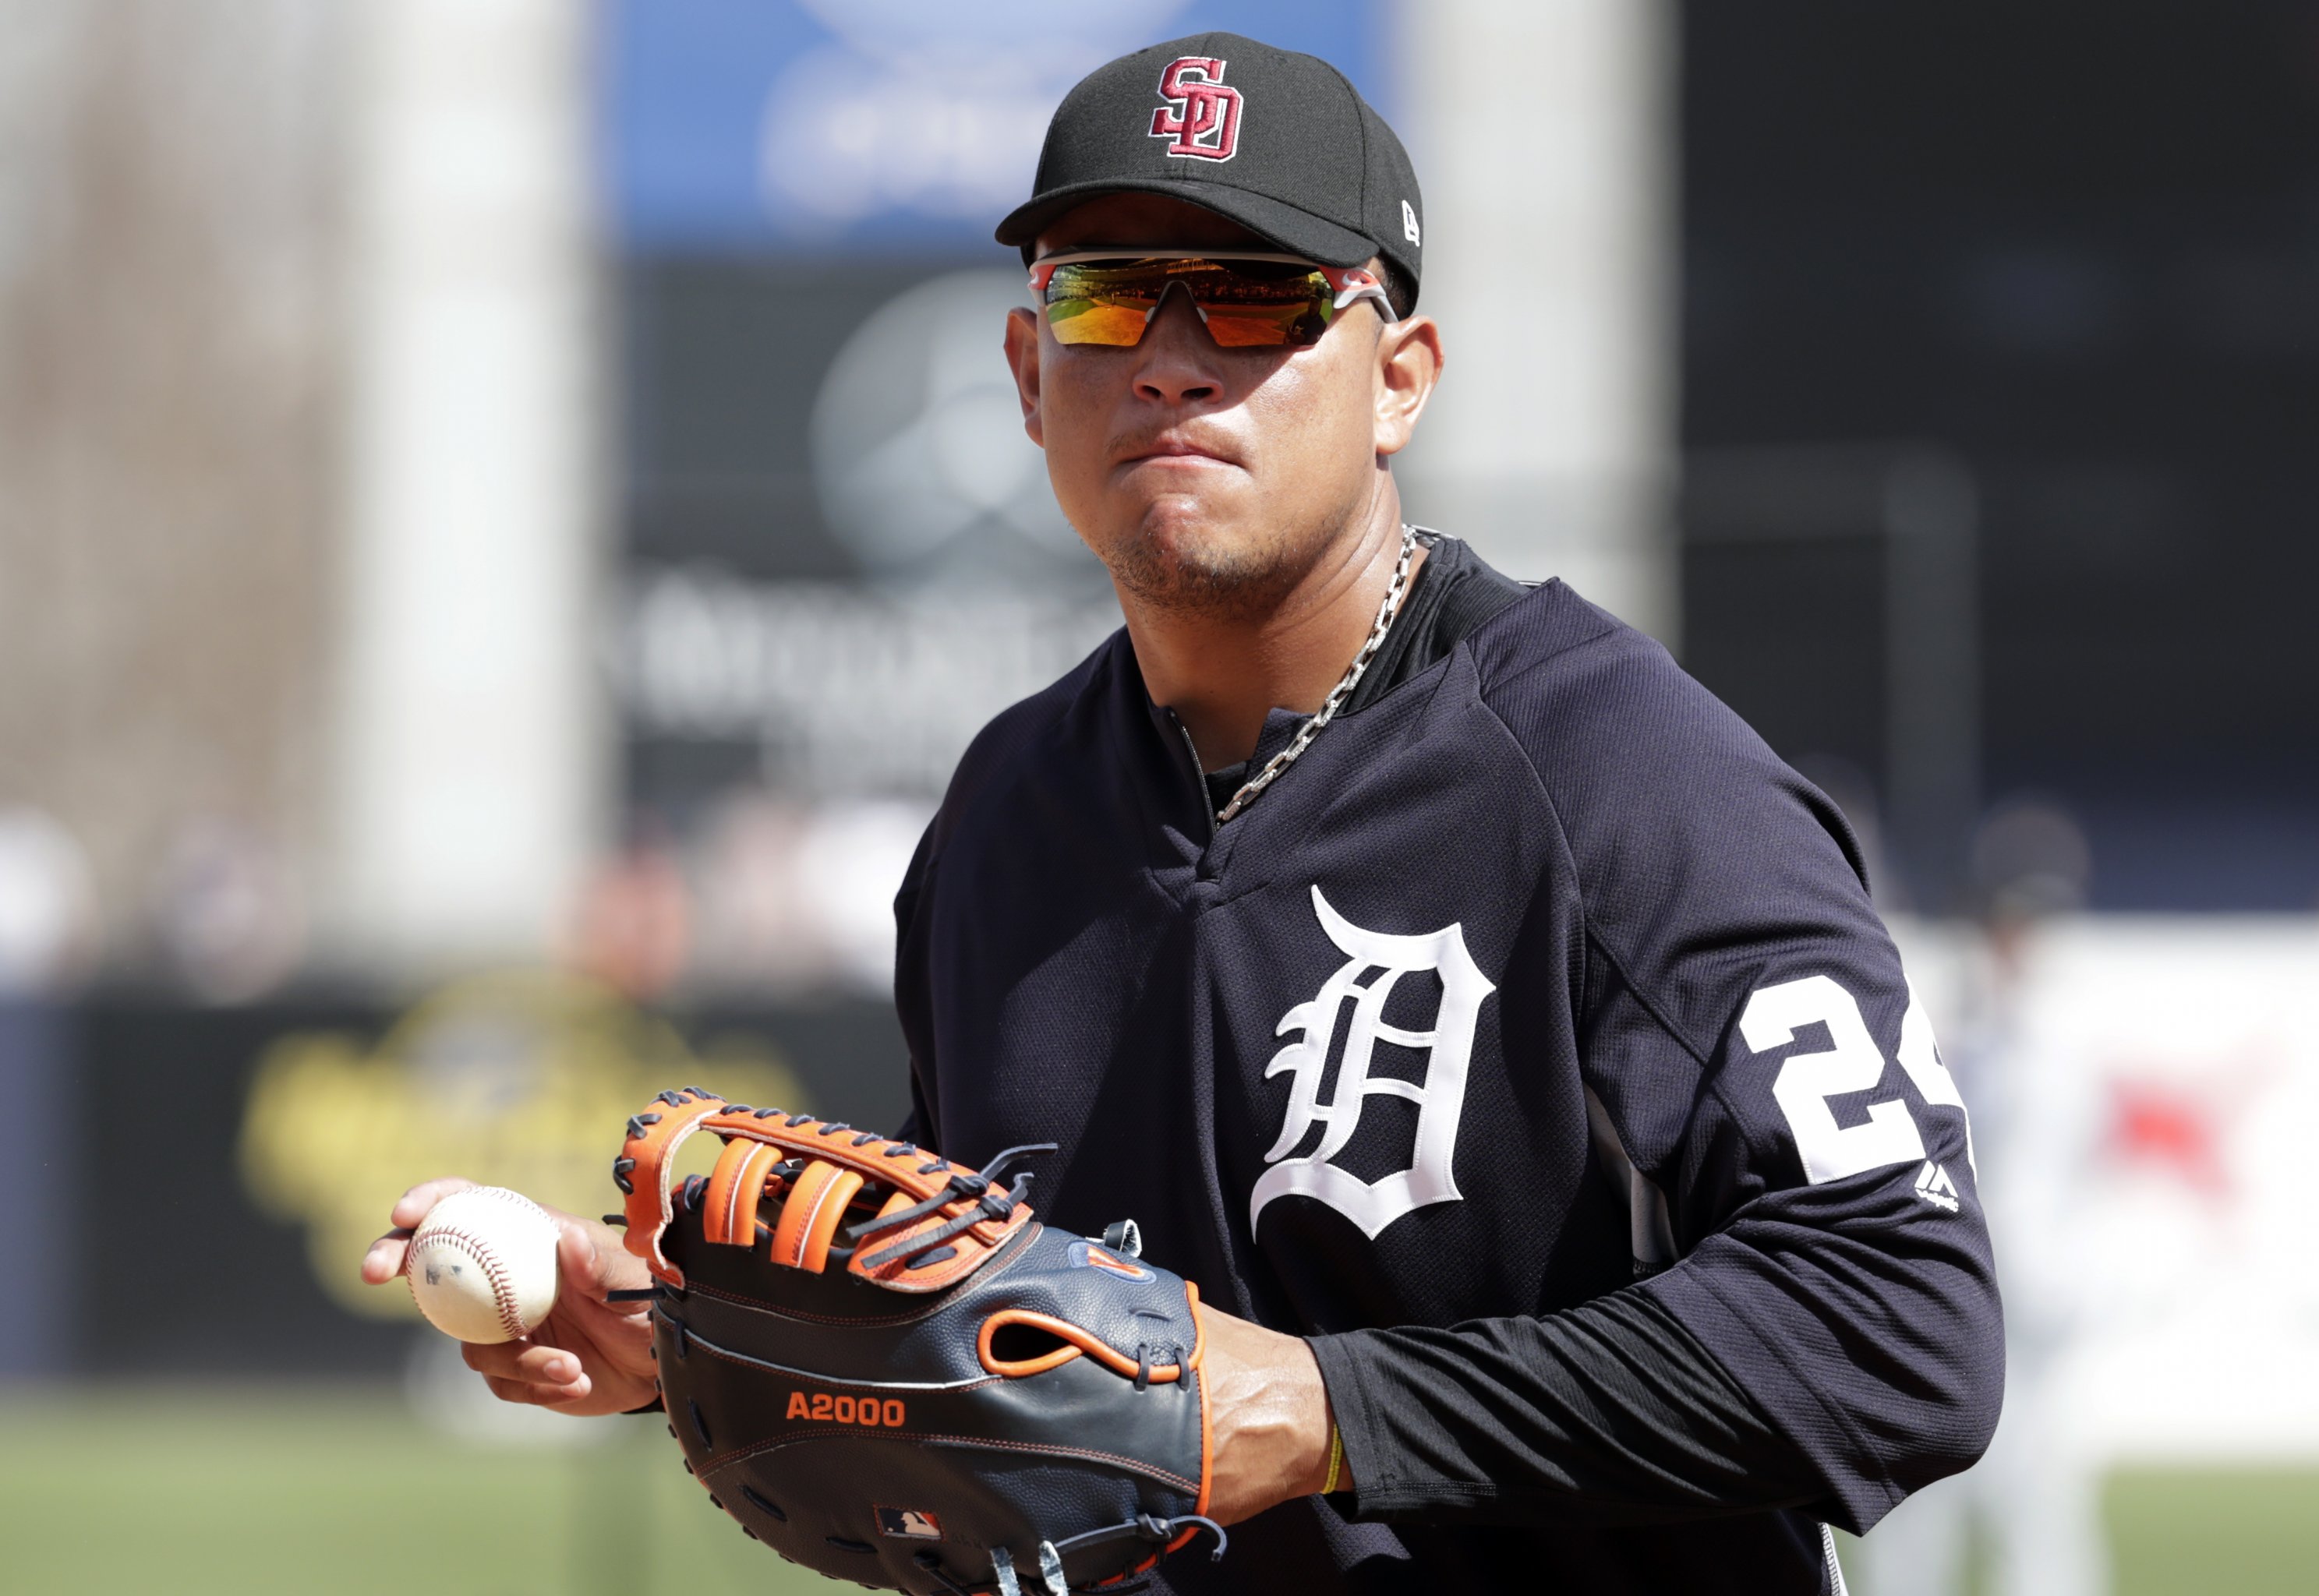 How long will Miggy be a top-five pick in fantasy baseball